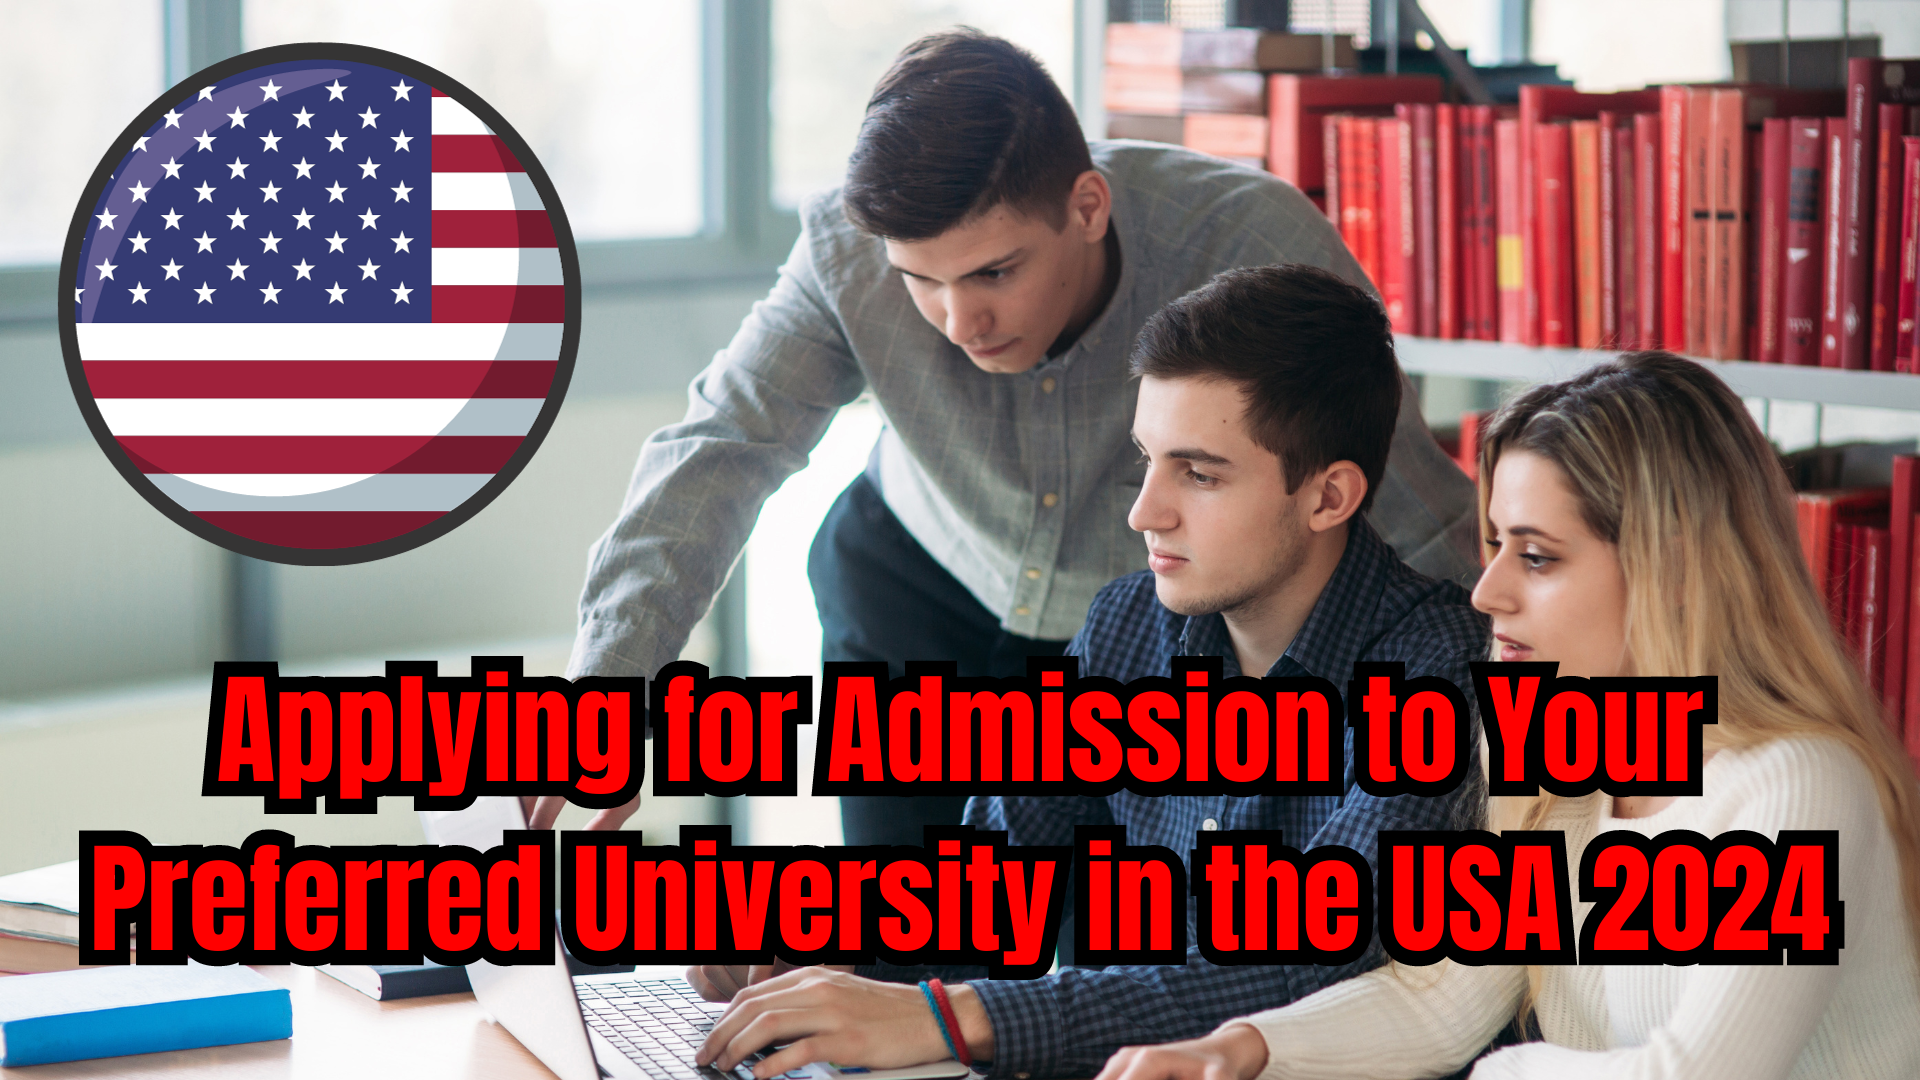 Applying for Admission to Your Preferred University in the USA 2024